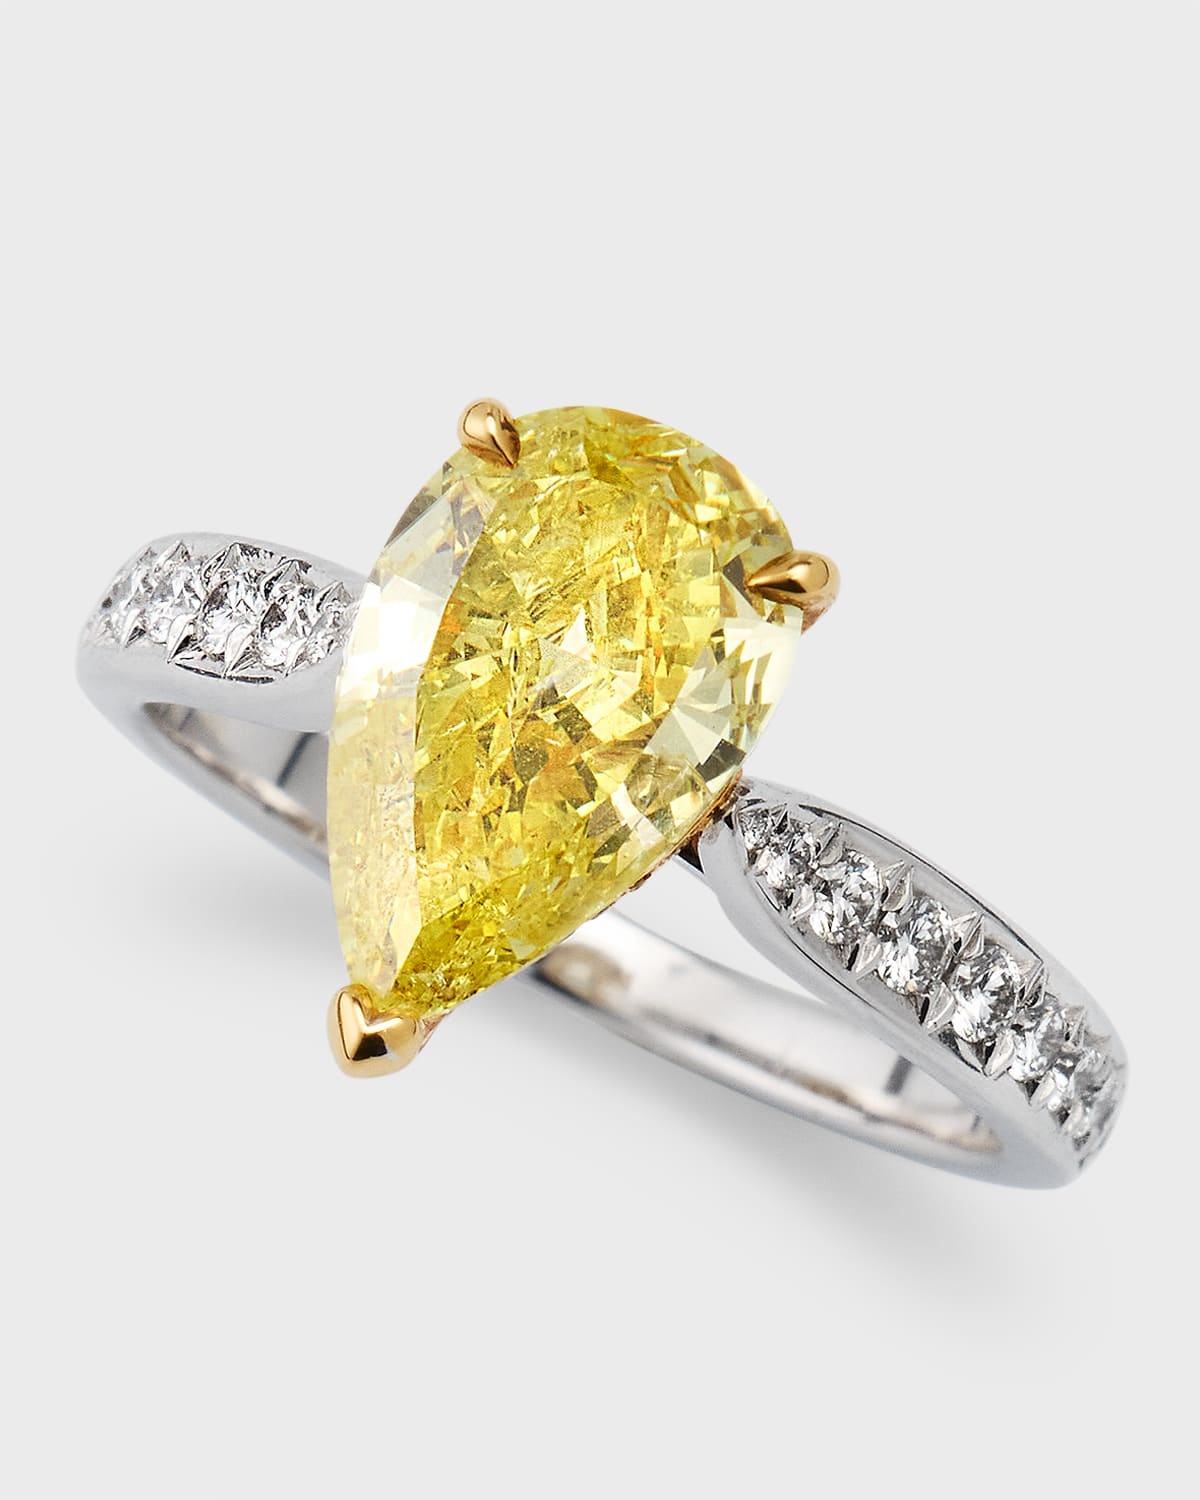 High Jewelry 18K White Gold One-of-a-Kind Yellow Diamond Solitaire Ring - 3